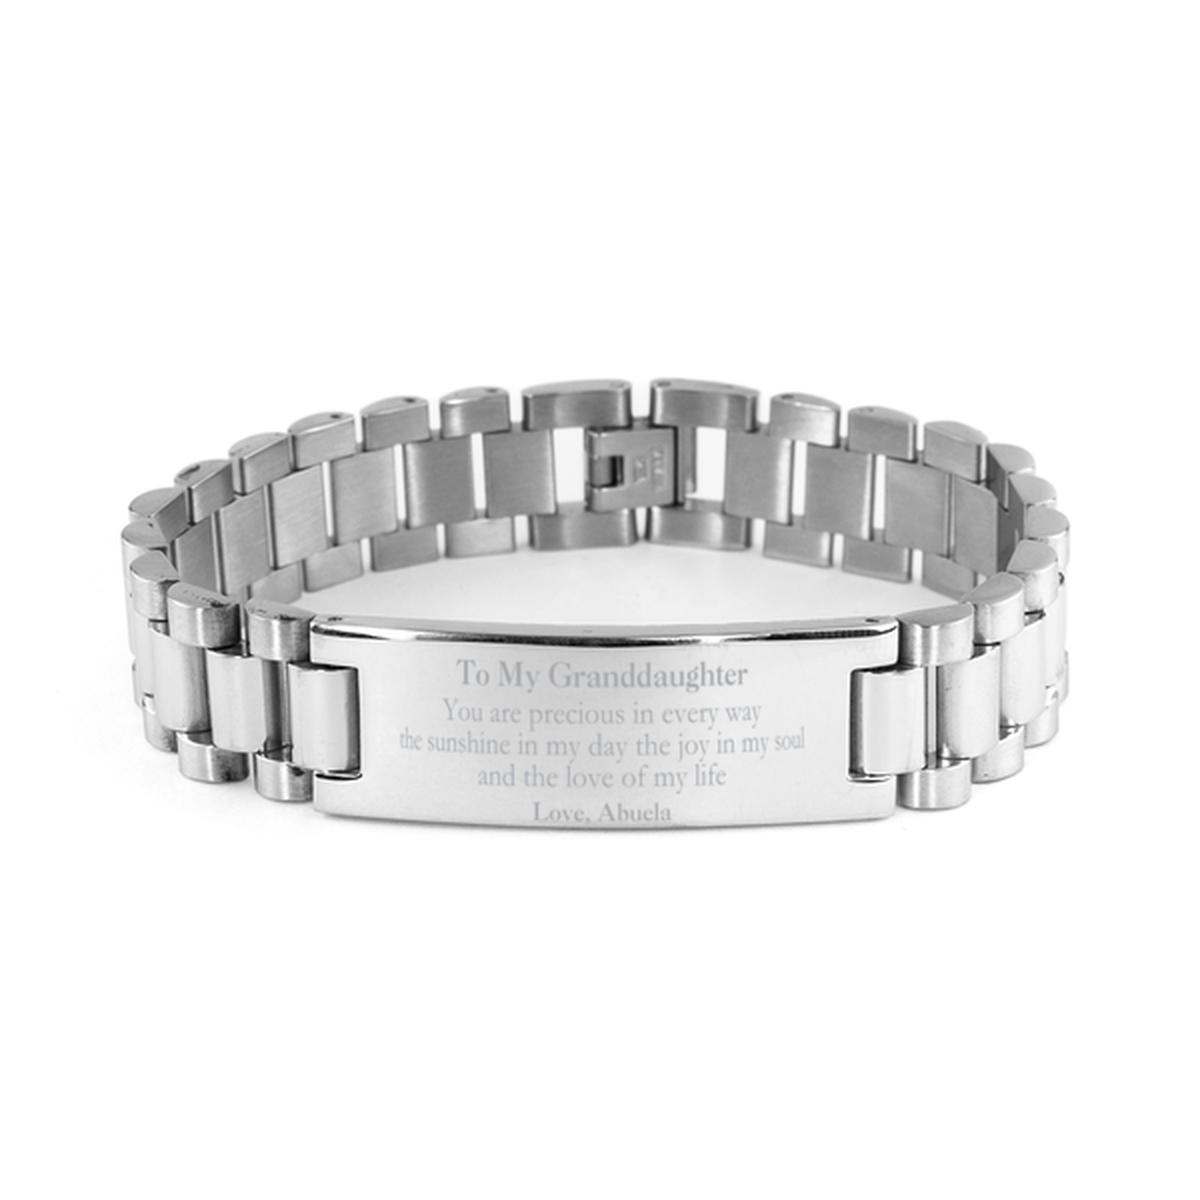 Graduation Gifts for Granddaughter Ladder Stainless Steel Bracelet Present from Abuela, Christmas Granddaughter Birthday Gifts Granddaughter You are precious in every way the sunshine in my day. Love, Abuela